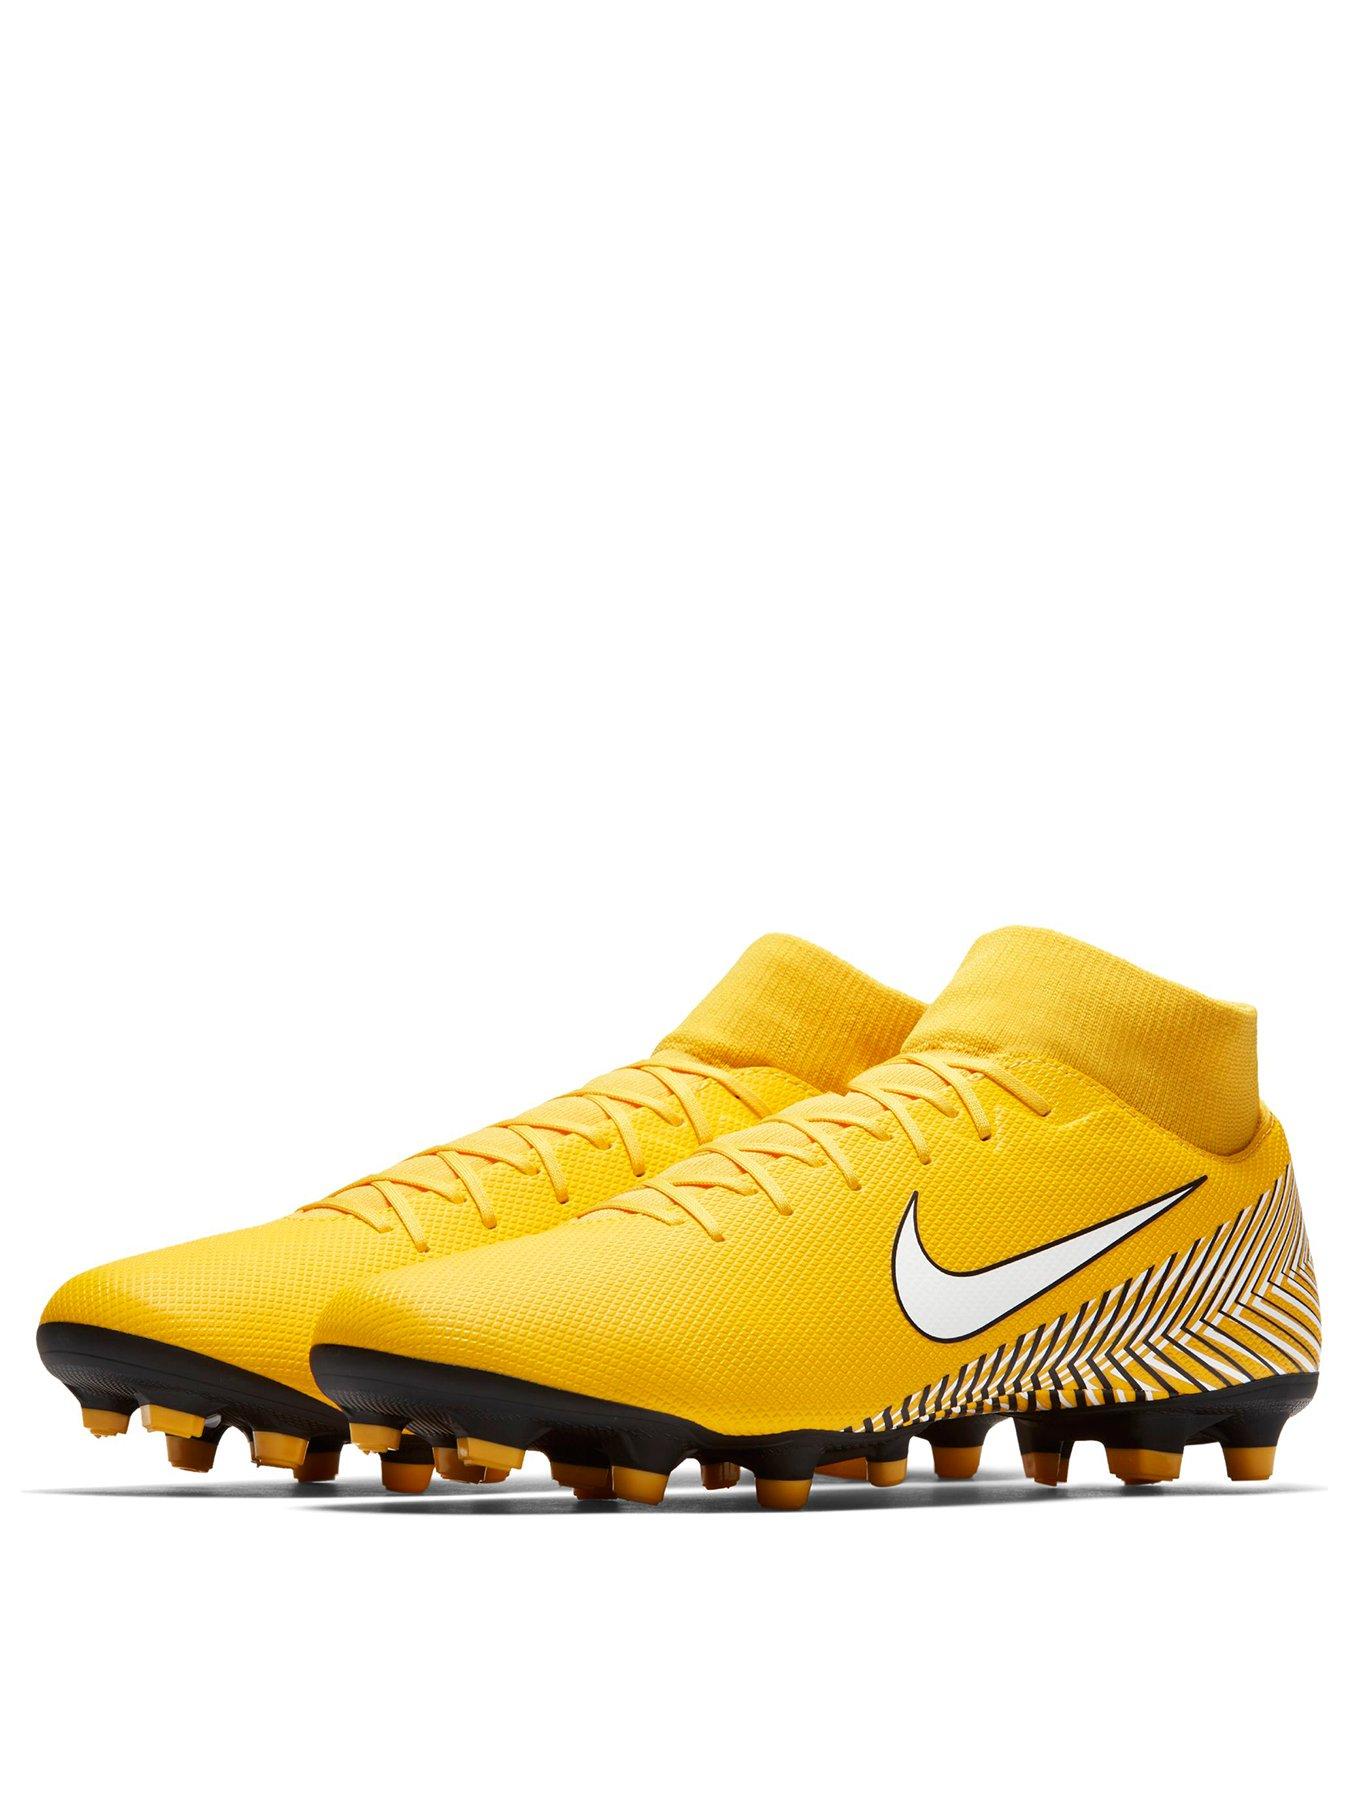 cheap nike mercurial superfly cleats Football Cleats of 2019